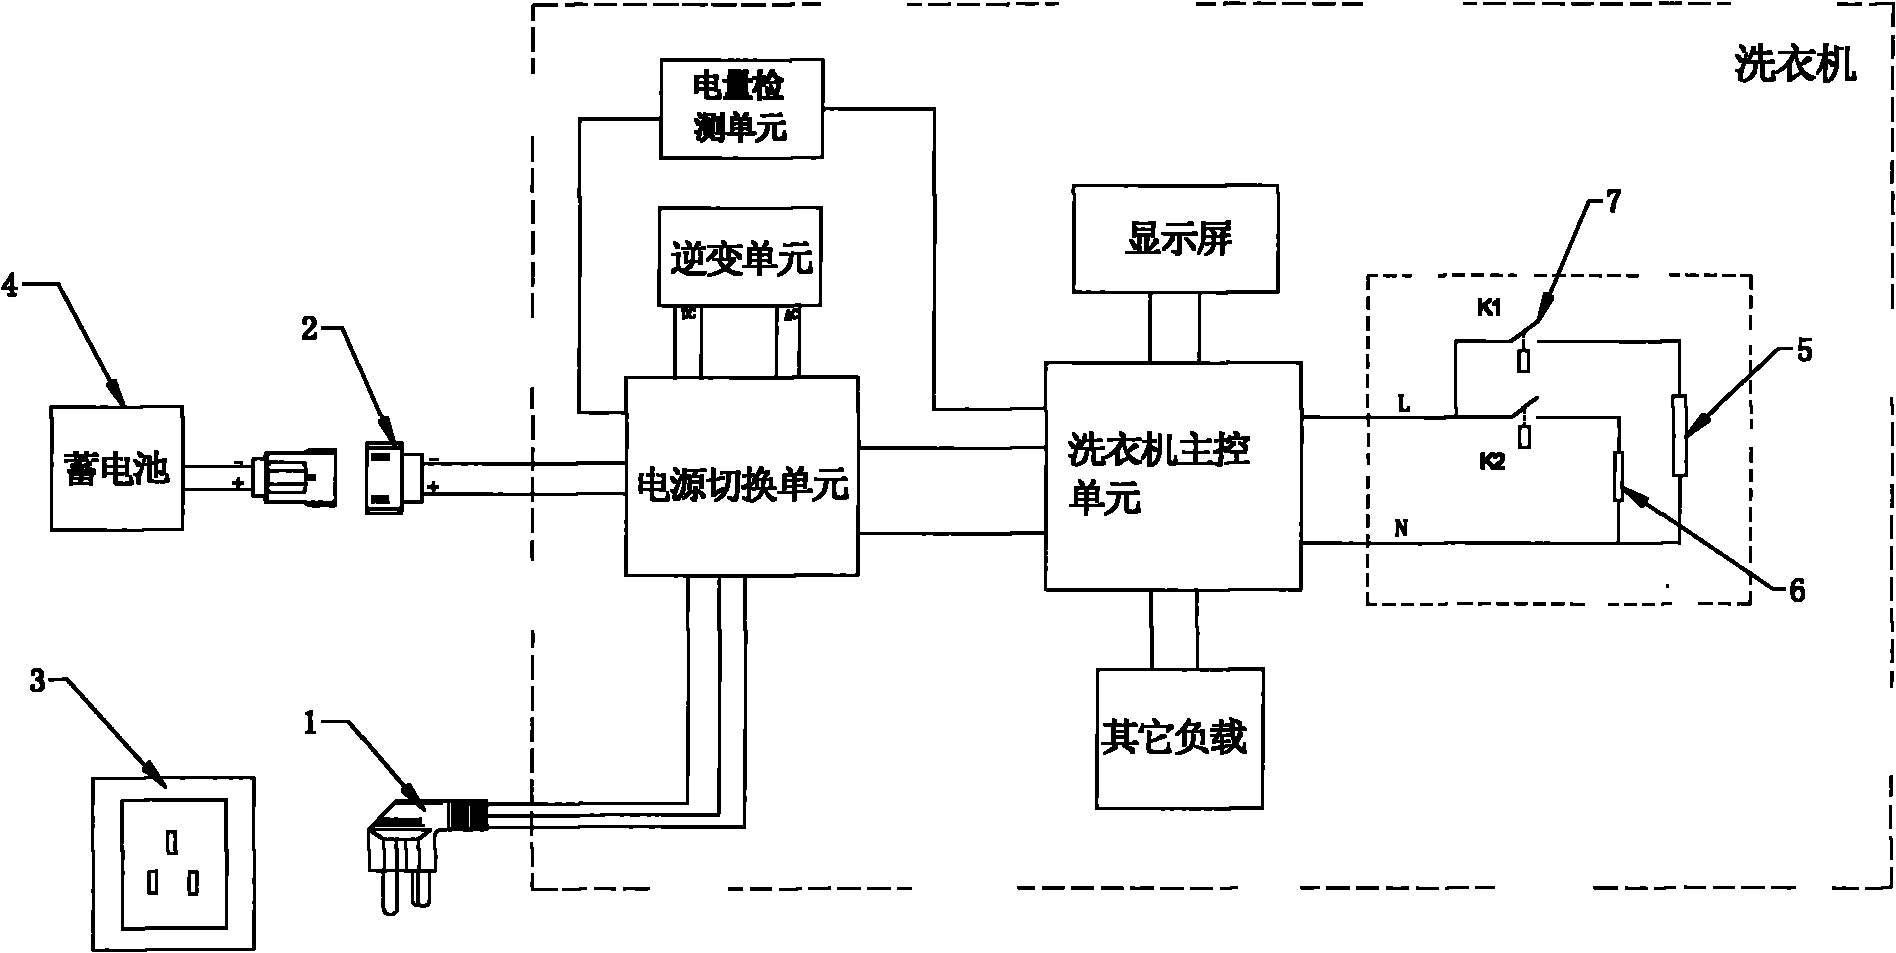 System and method for automatically switching input power according to heating power of washing machine